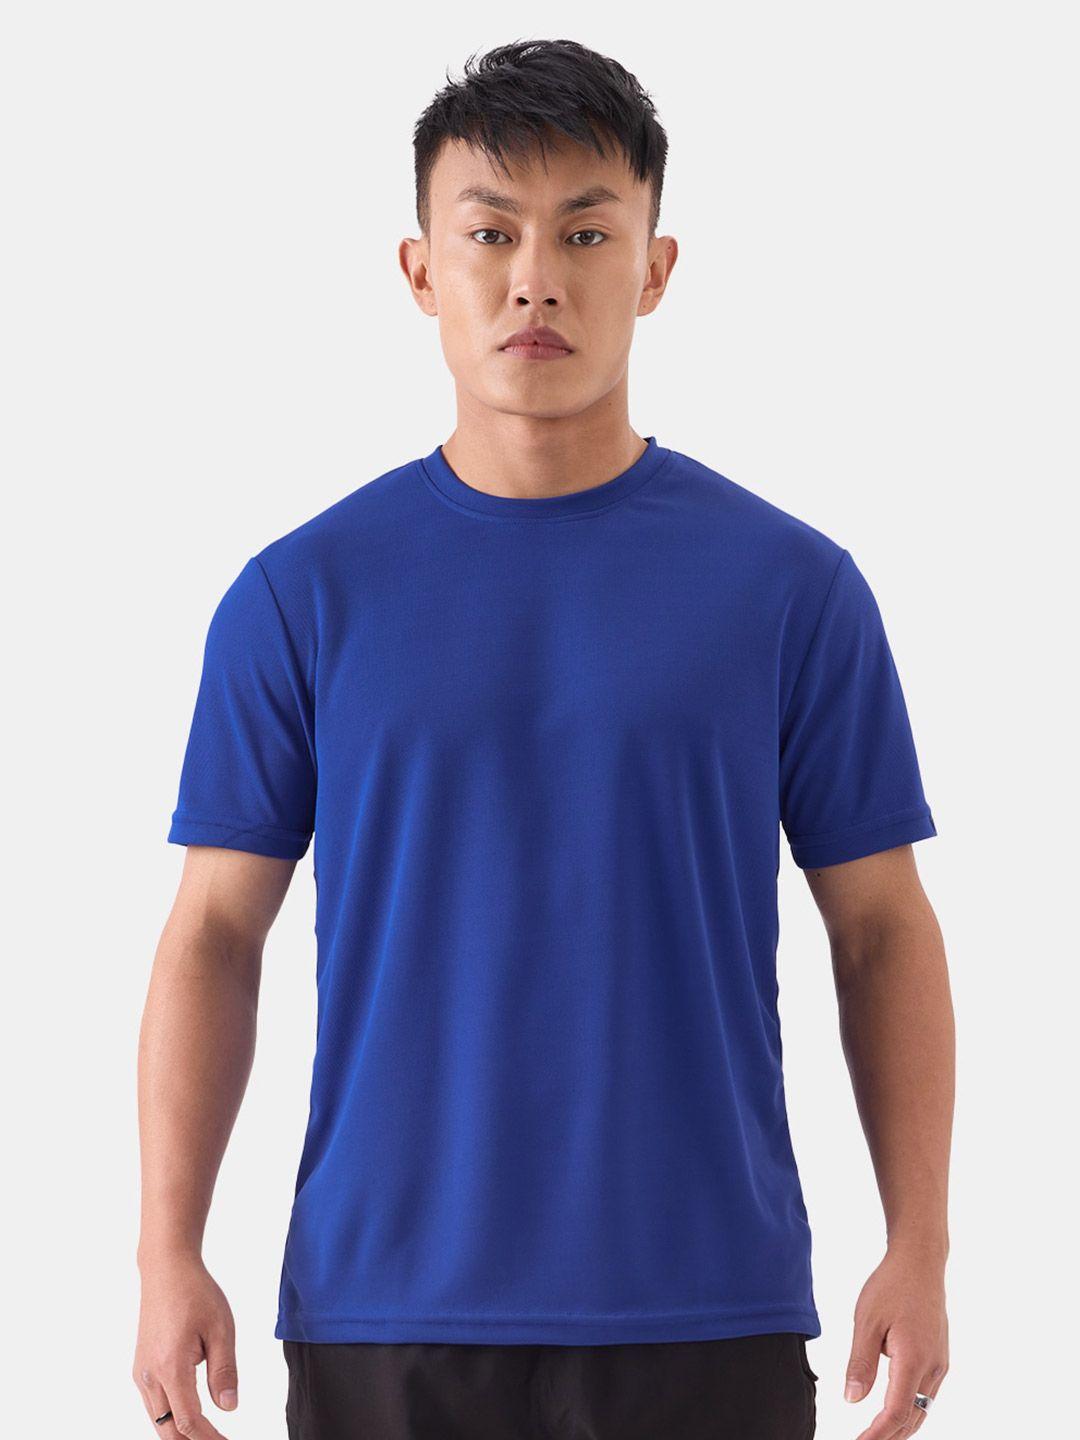 the-souled-store-blue-running-sports-t-shirt